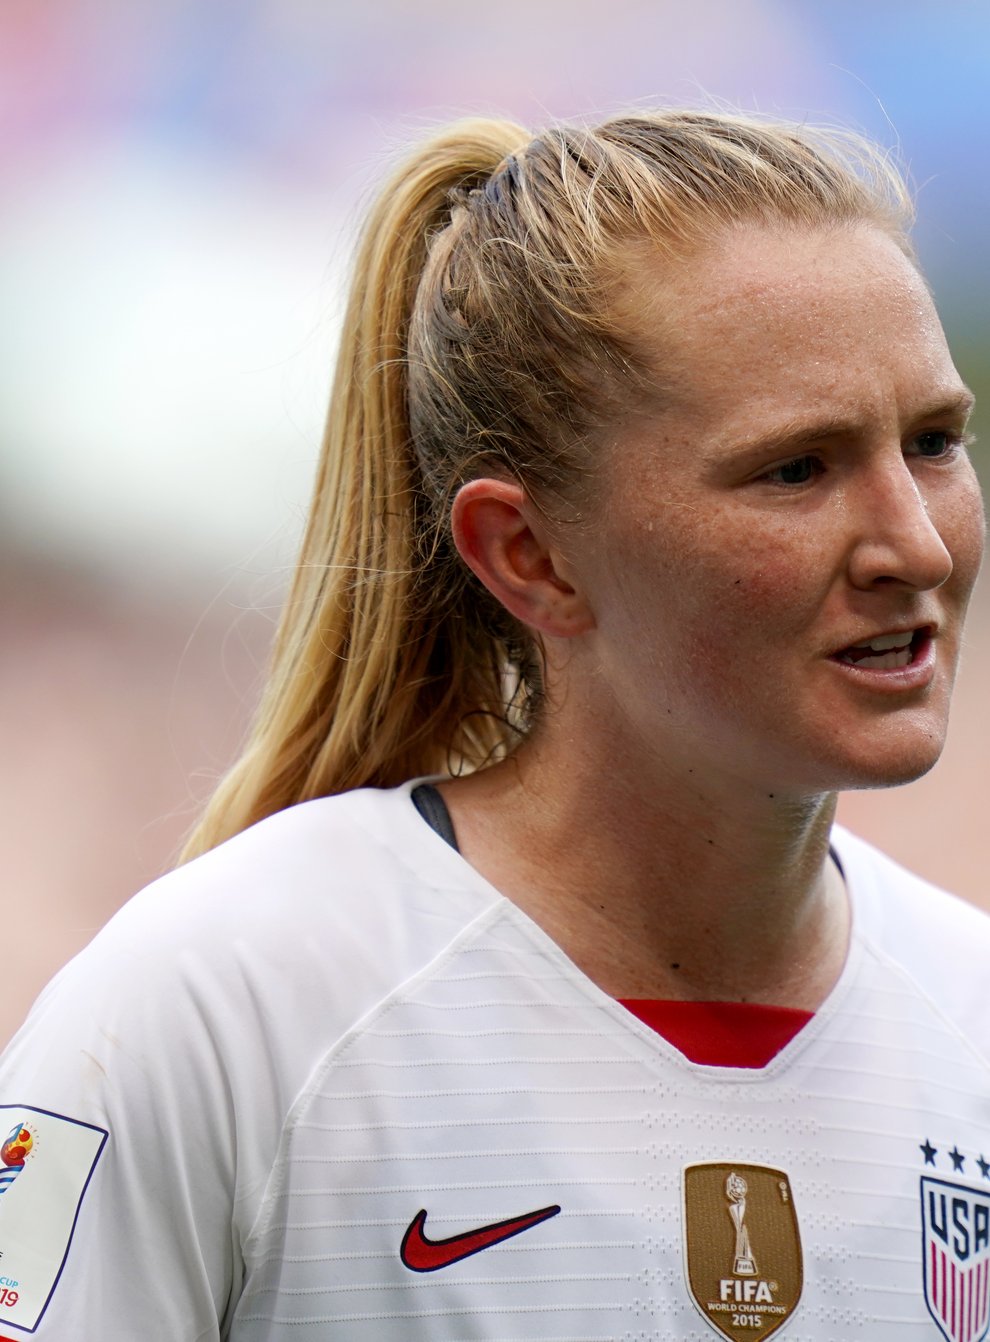 Mewis has joined WSL club Manchester City